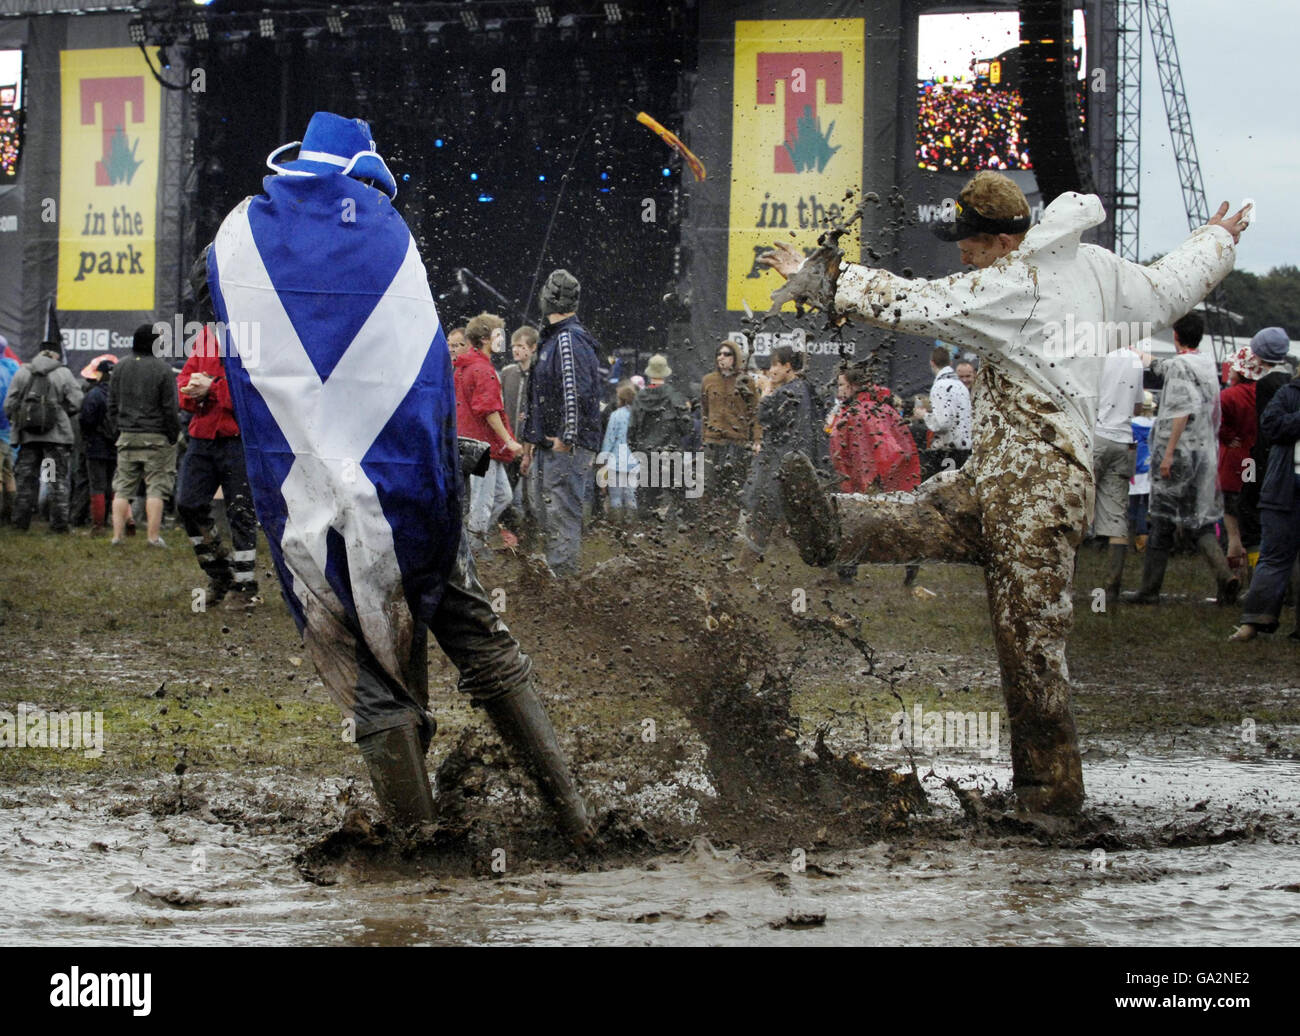 Members of the public dance in a puddle at T in the Park in Balado, Perth and Kinross. Stock Photo